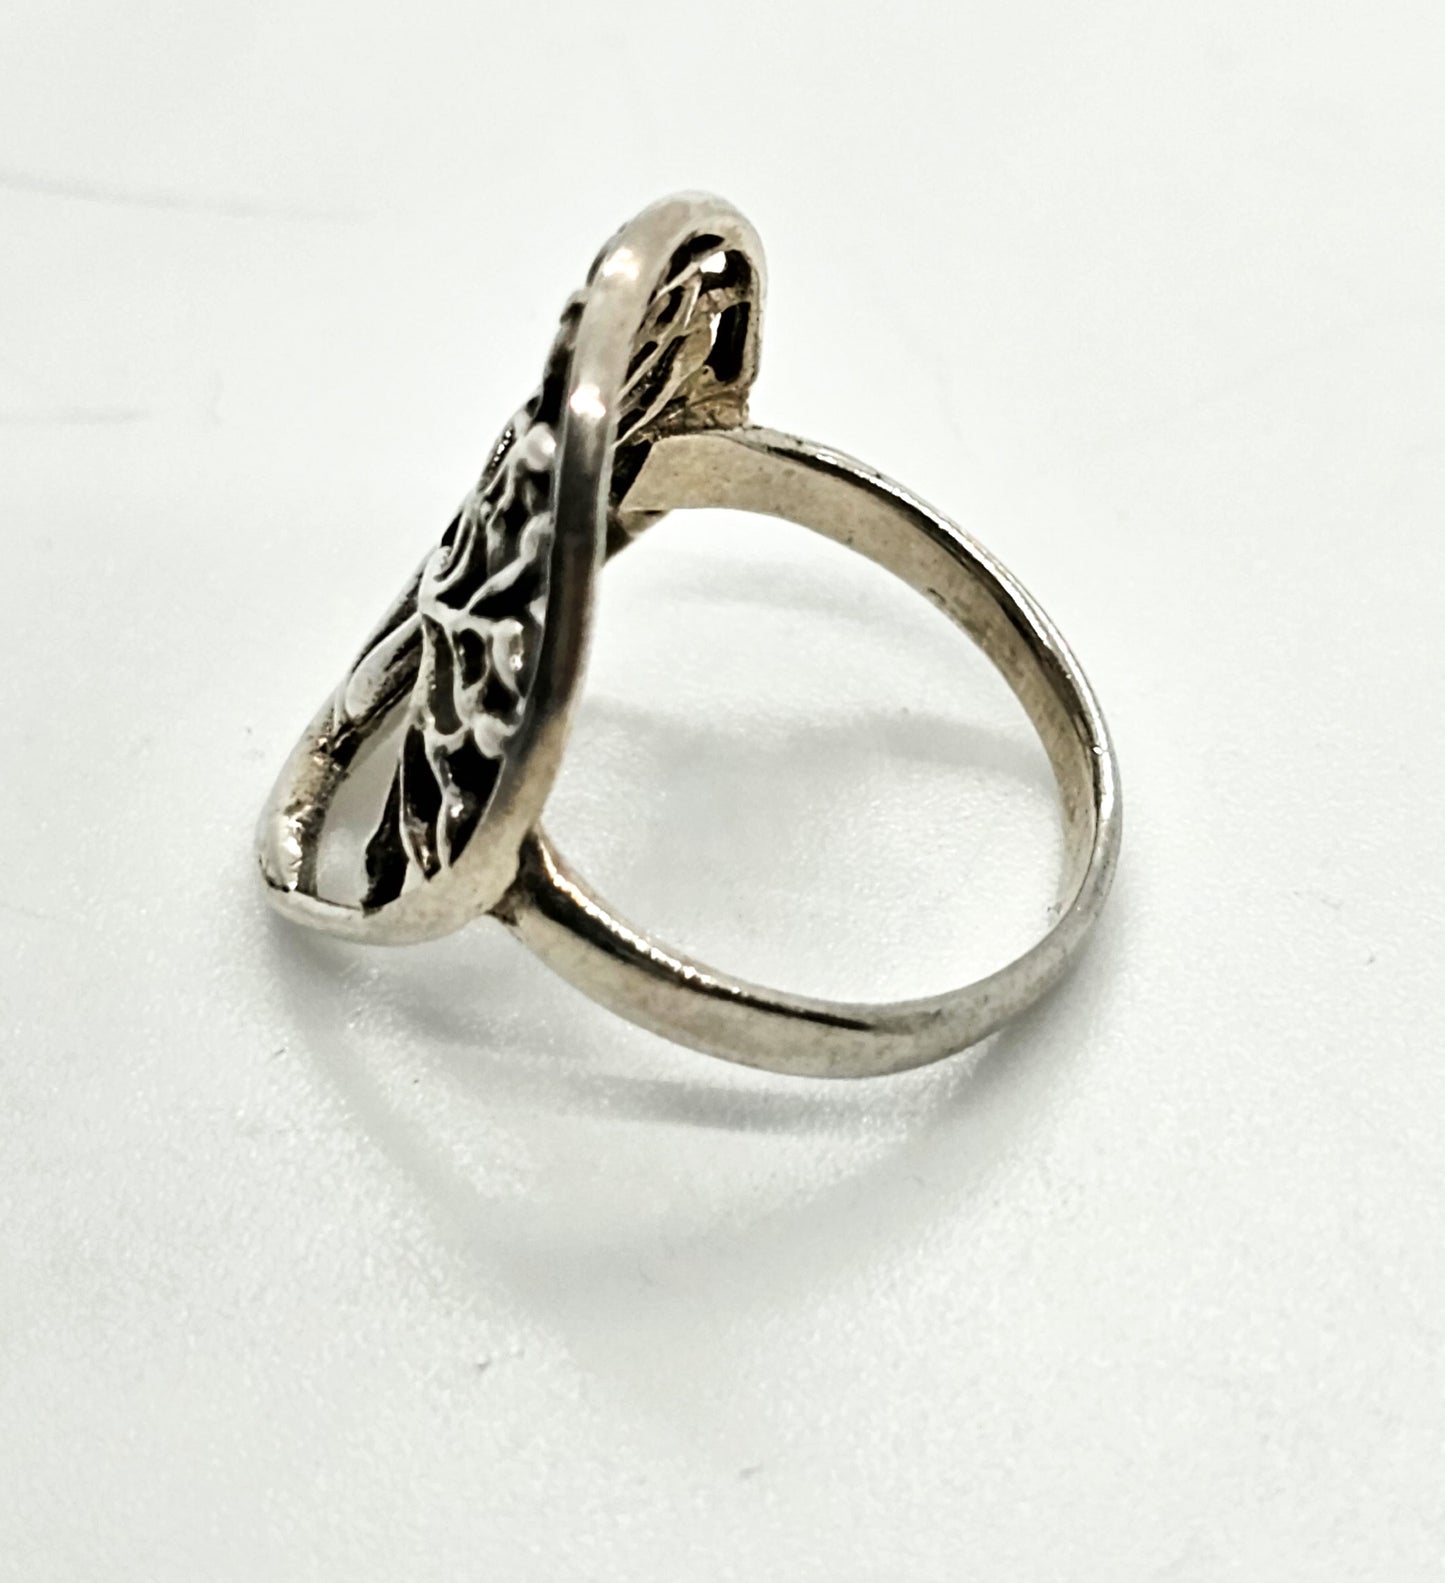 Twisted Tree of Life Celtic knot open work sterling silver ring size 6